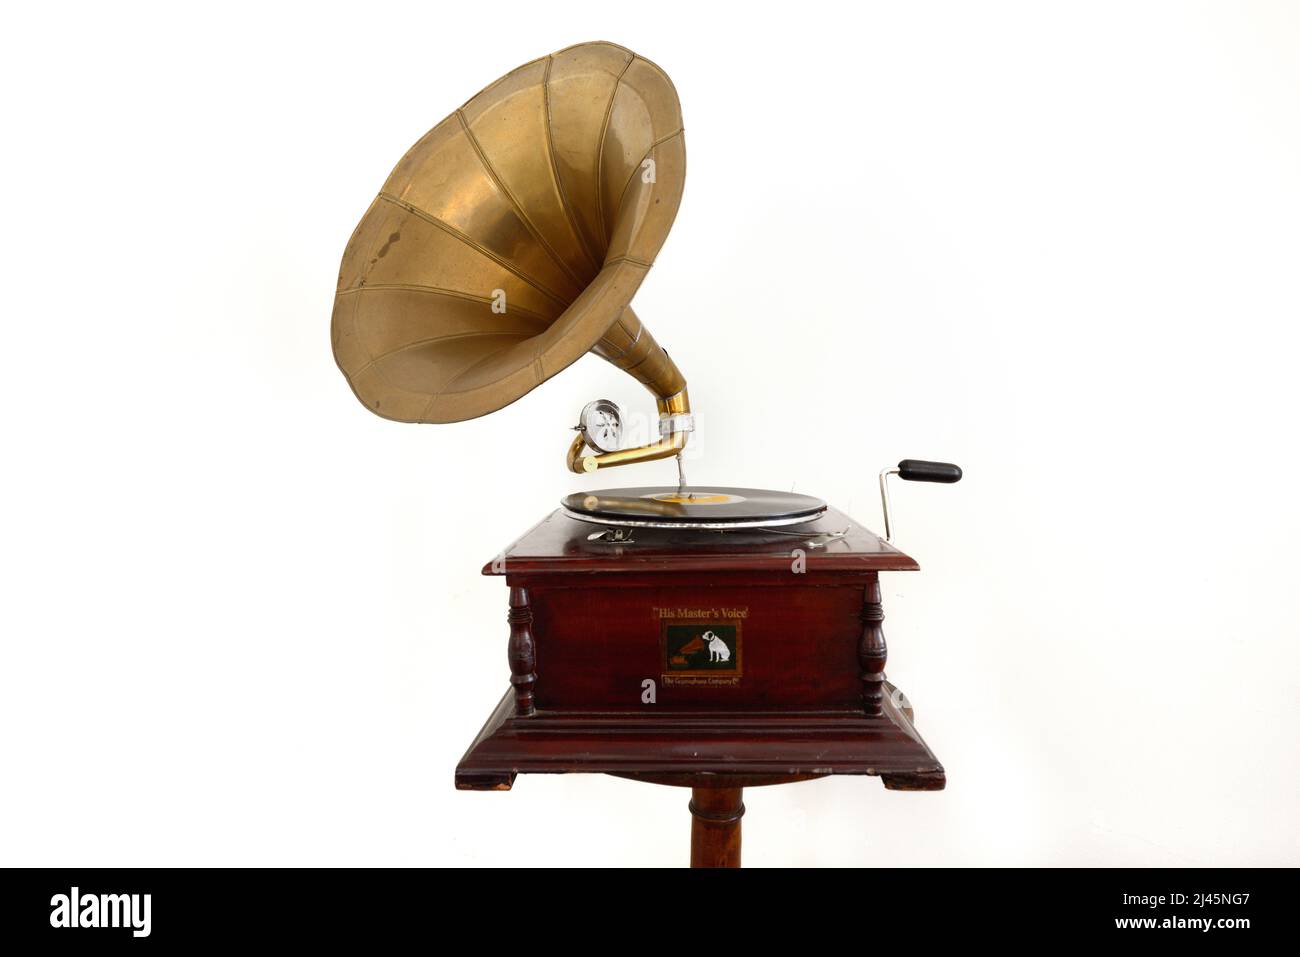 Old, Vintage, Antique or Early c20th Gramophone produced by The Gramophone Company Limited, aka His Master's Voice (HMV) on White Background Stock Photo